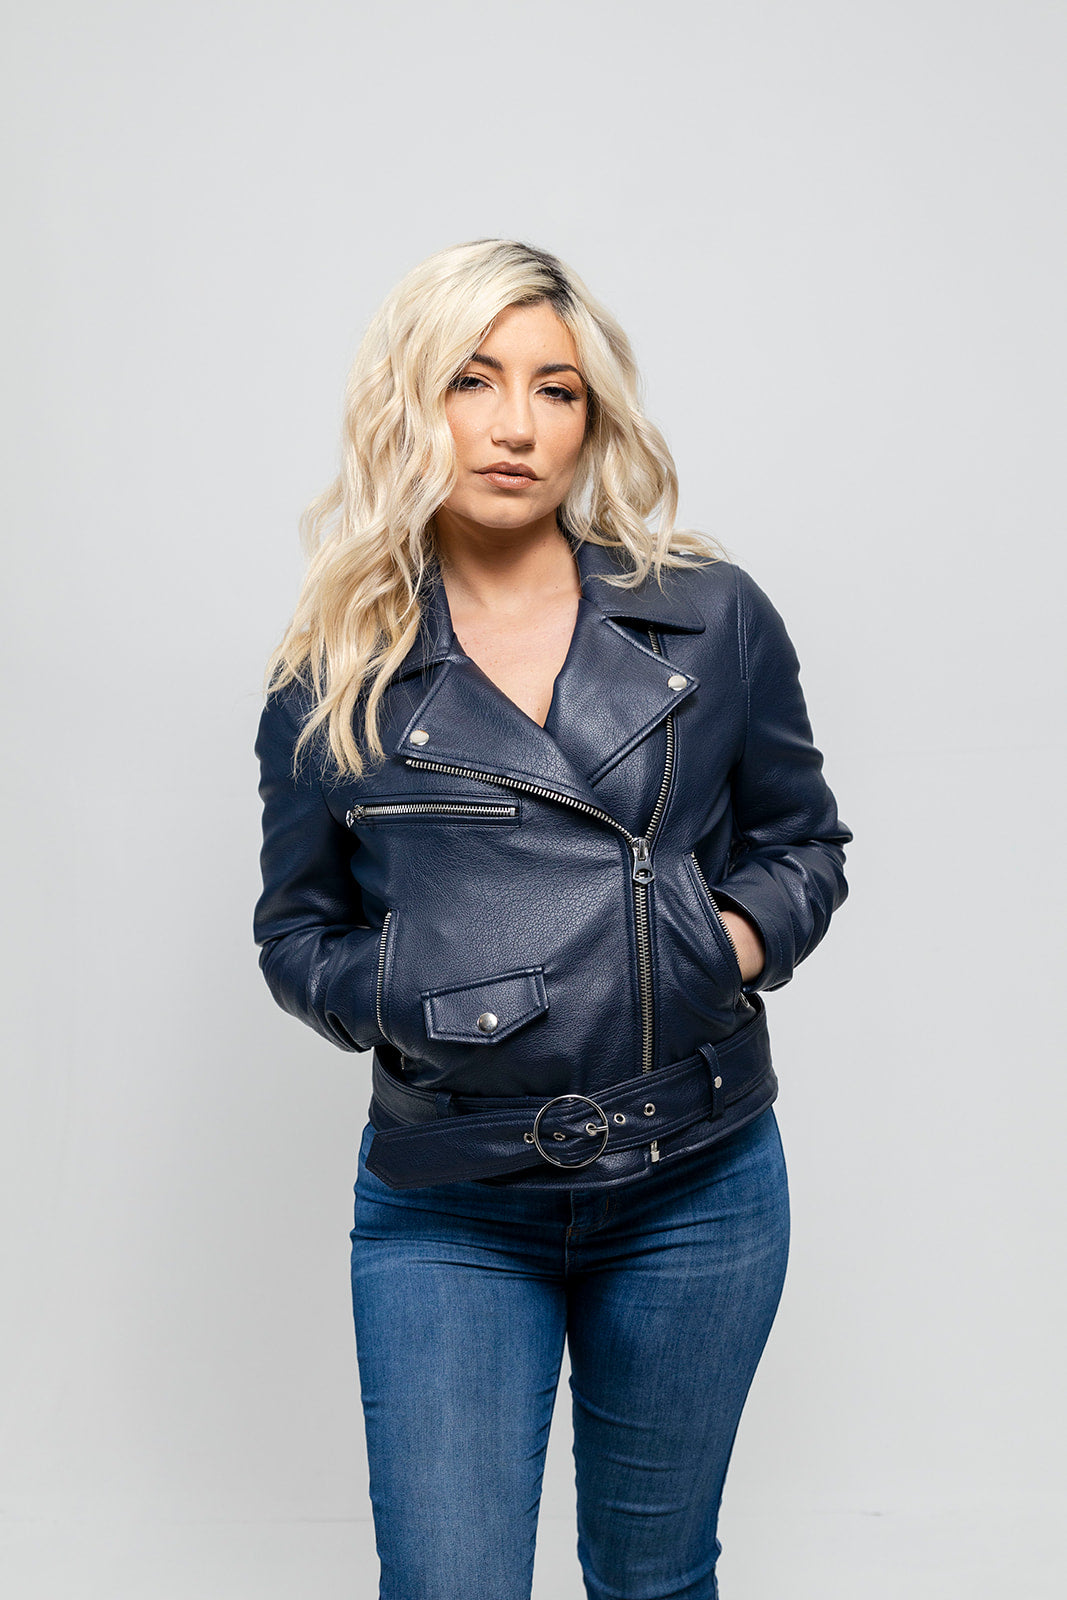 First Manufacturing Remy - Women's Vegan Faux Leather Jacket, Navy Blue